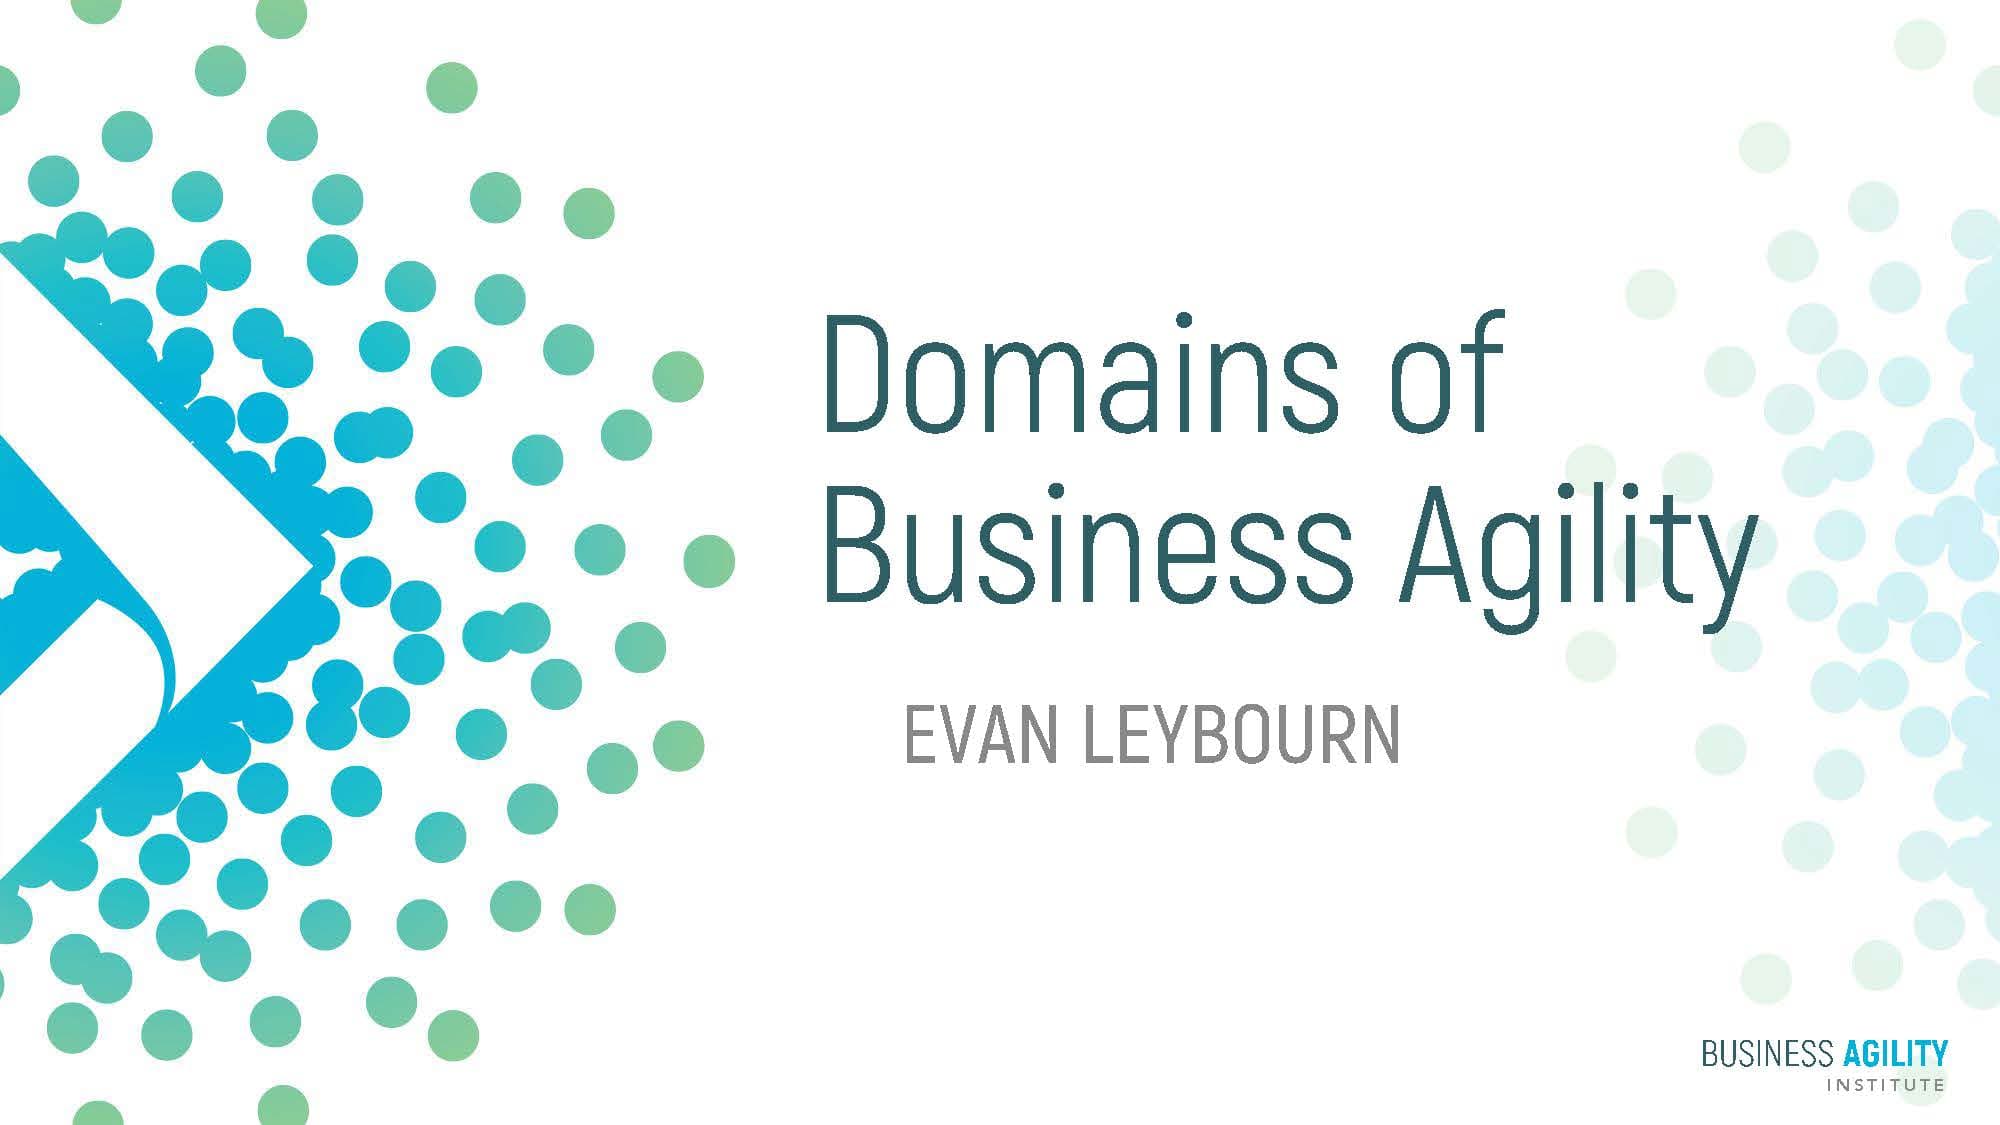 The Domains of Business Agility